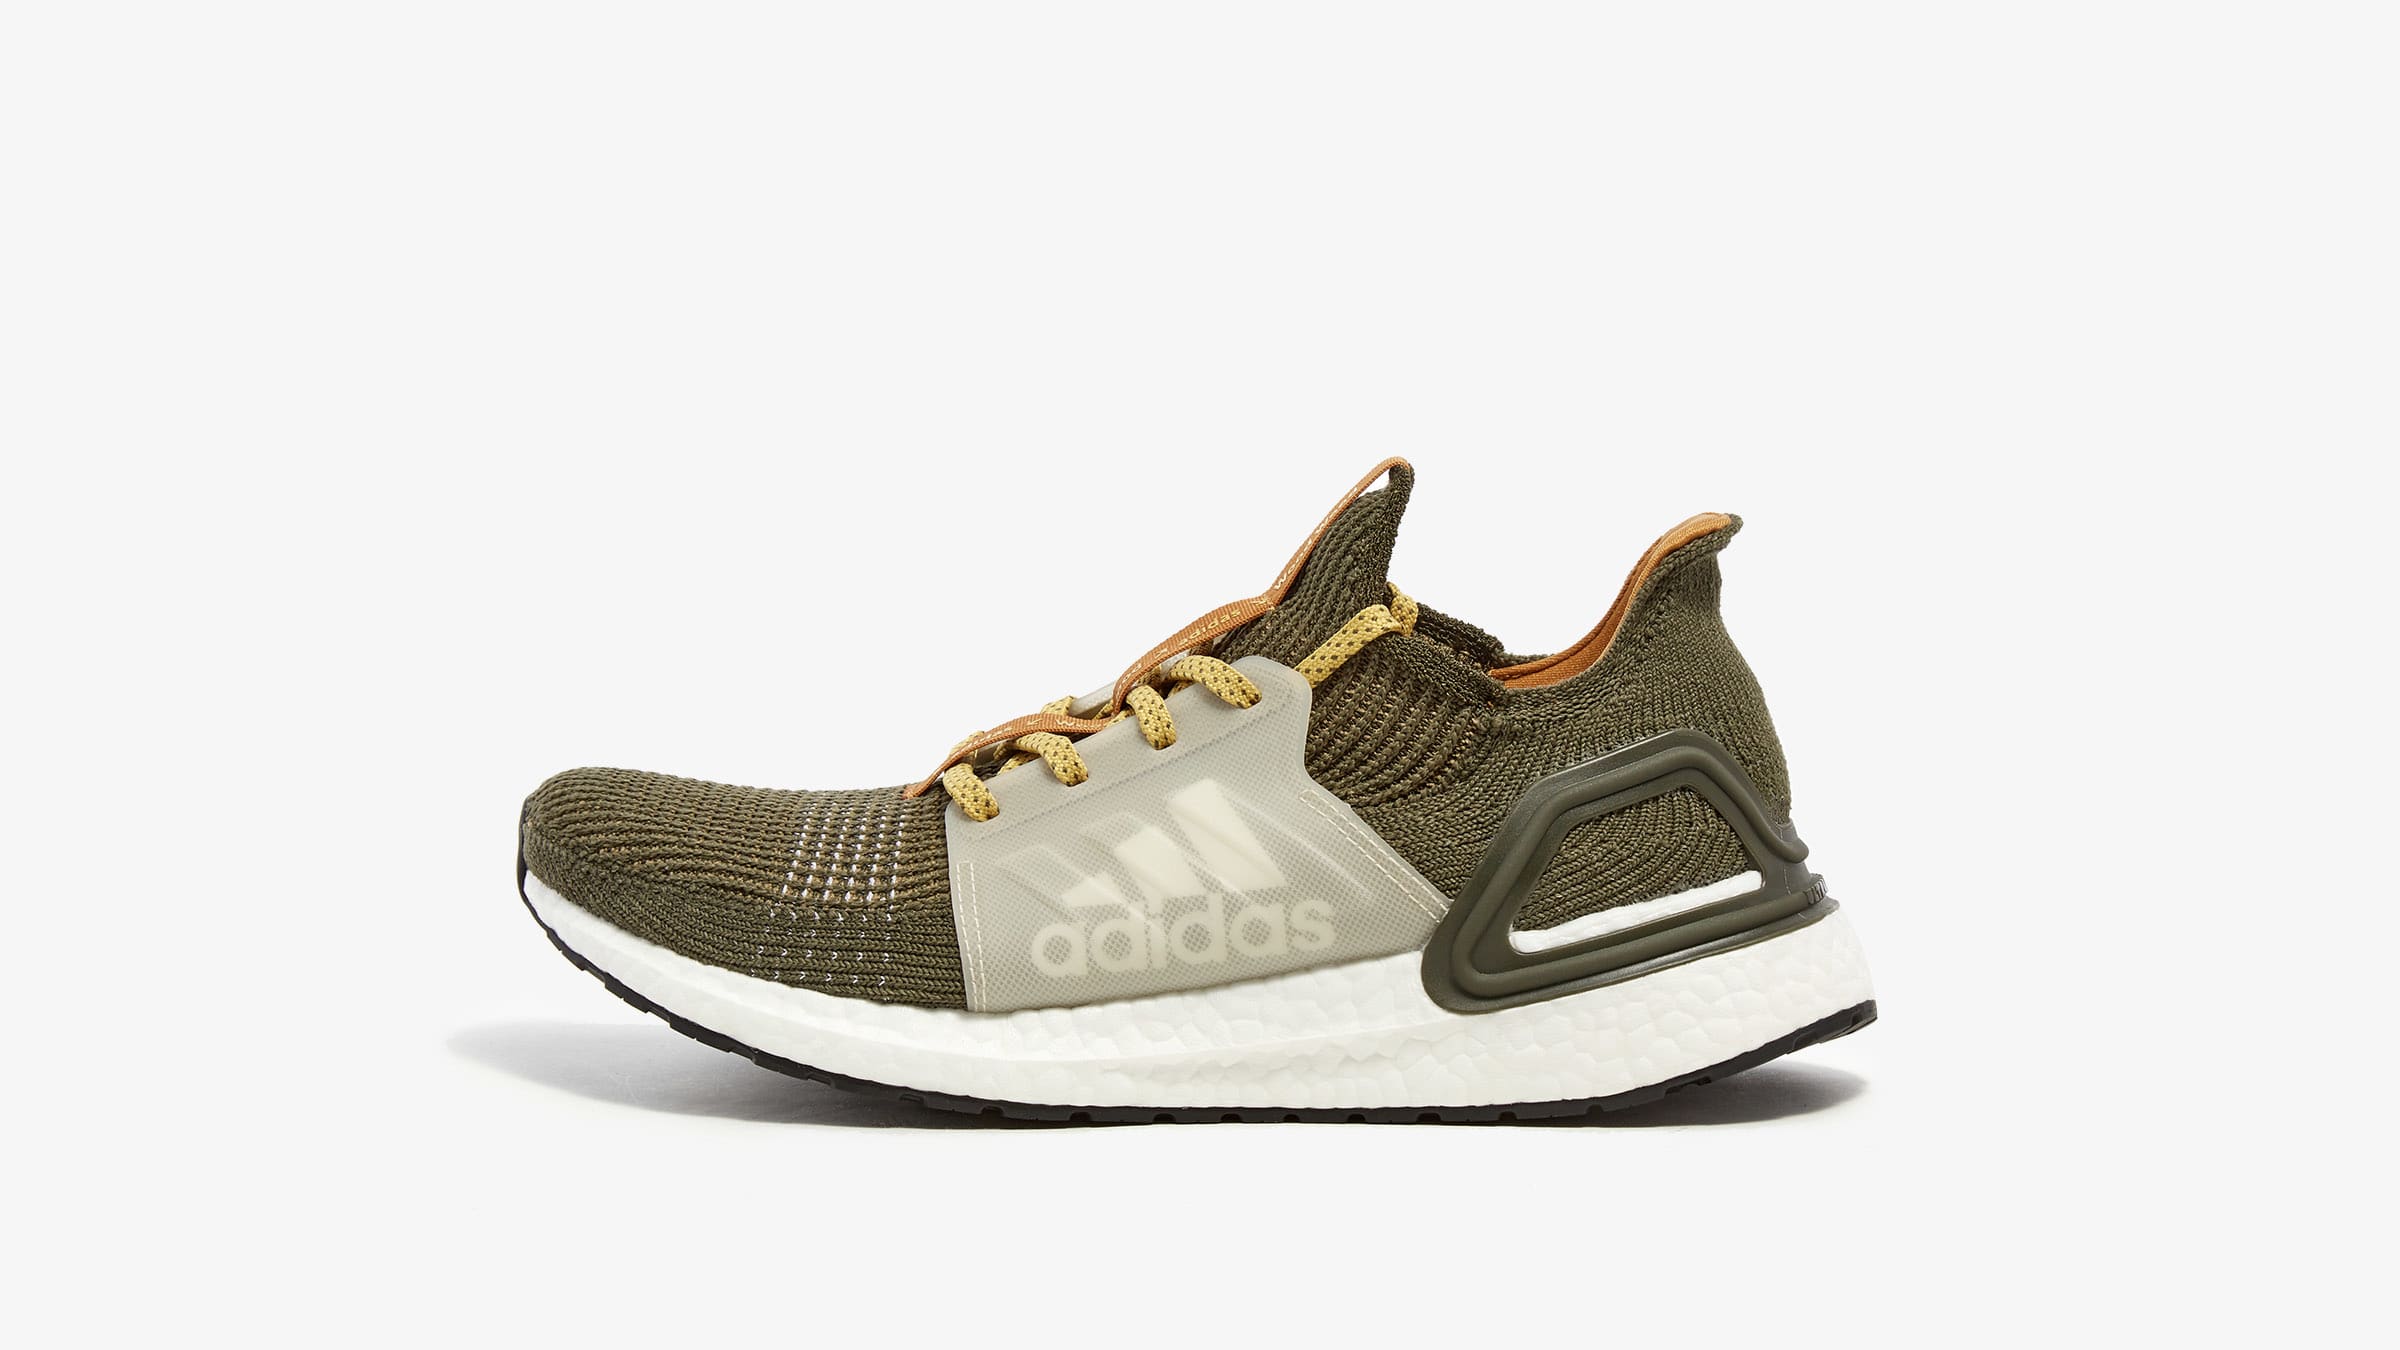 Adidas x Wood Wood Ultraboost 19 (Earth Green) | END. Launches